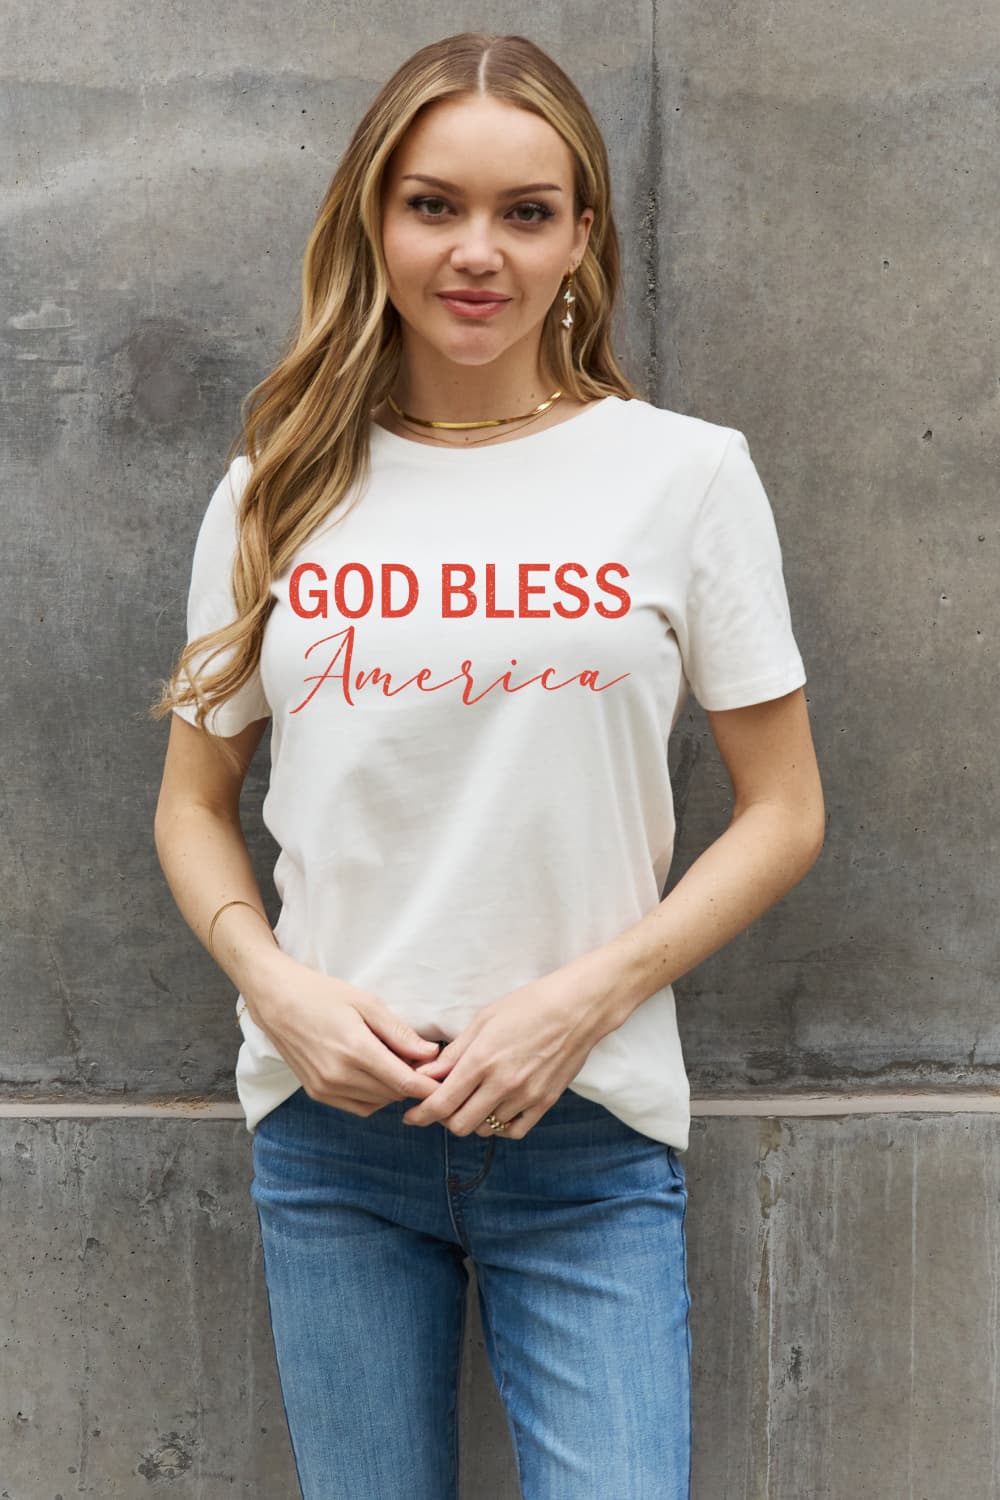 Simply Love GOD BLESS AMERICA Graphic Cotton Tee-TOPS / DRESSES-[Adult]-[Female]-2022 Online Blue Zone Planet